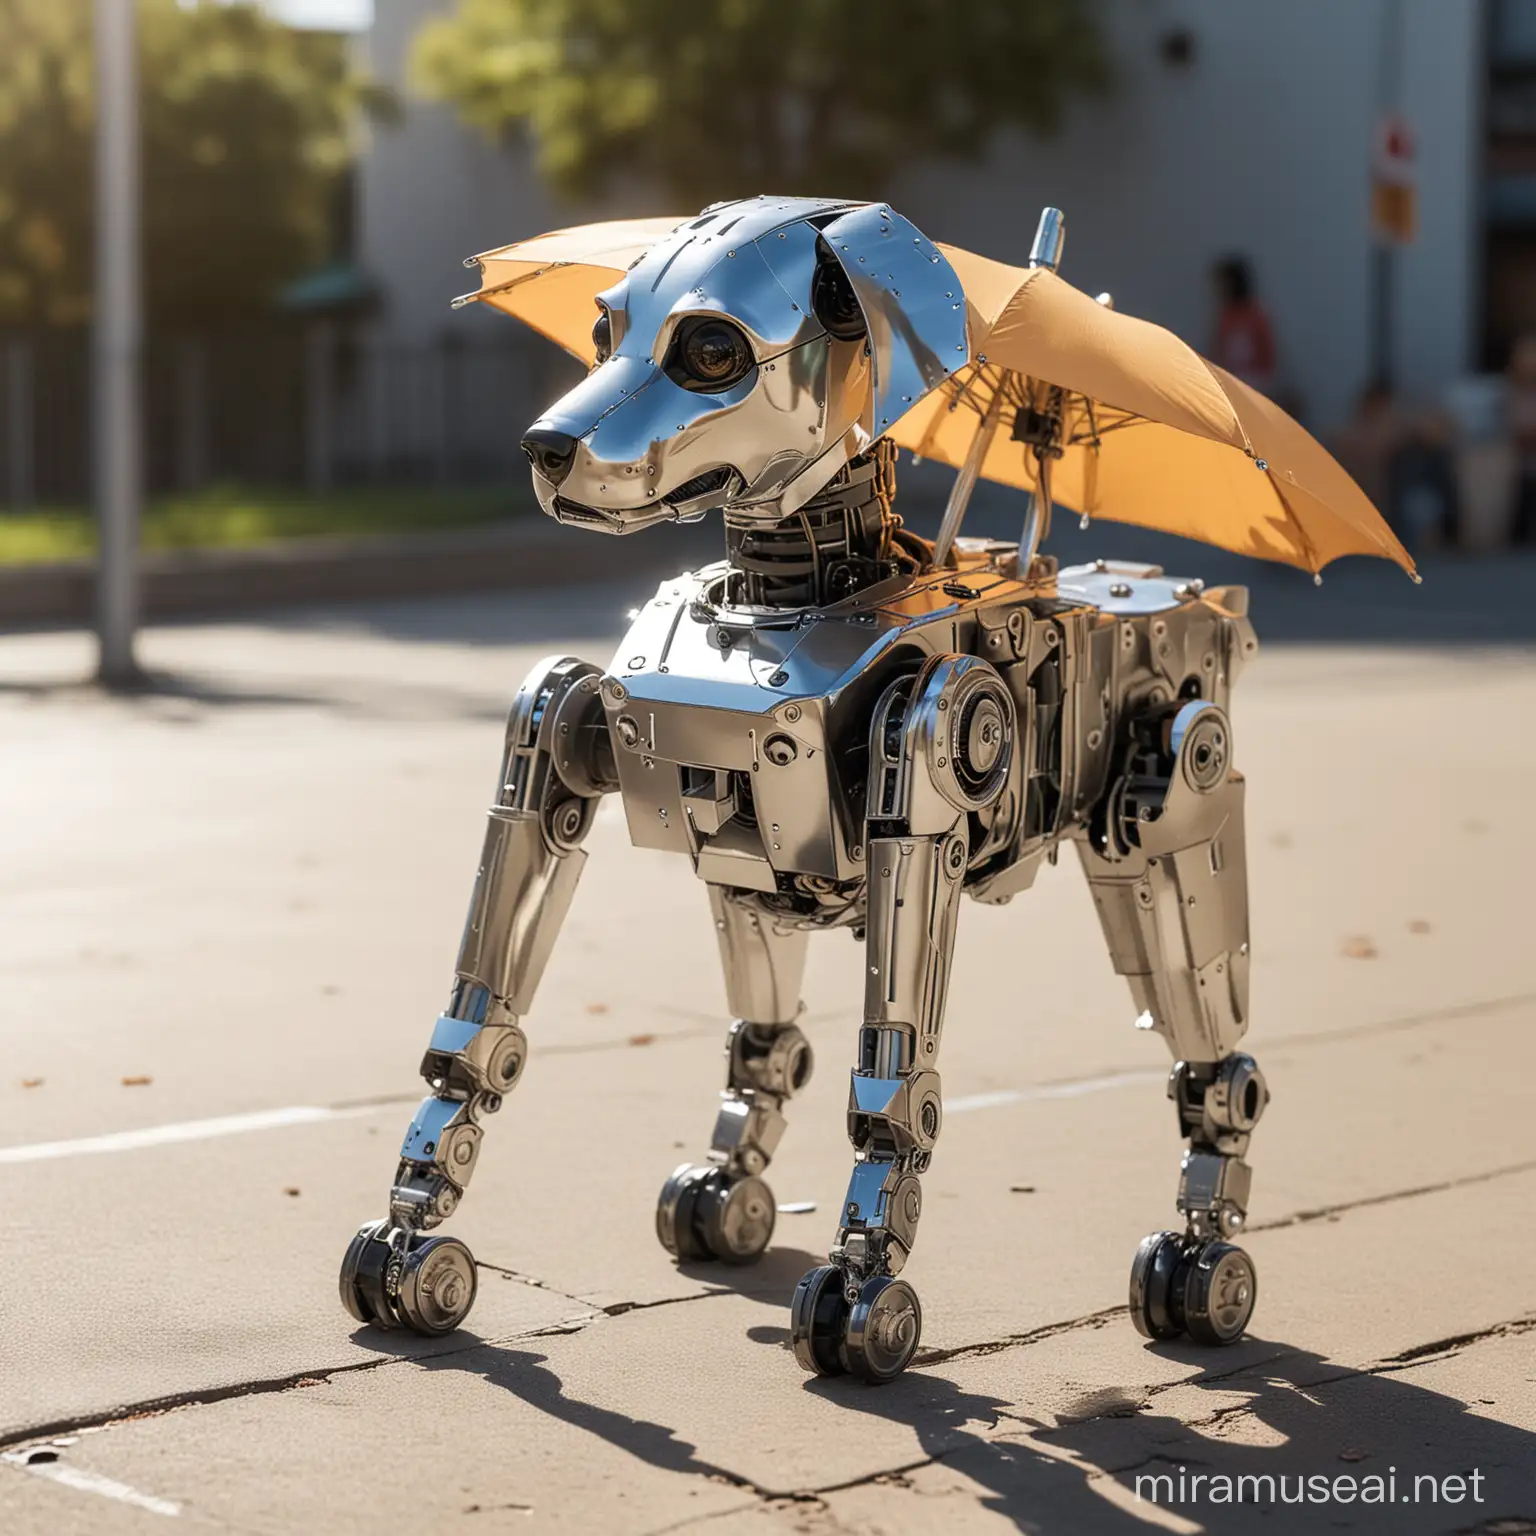 A metallic robot dog with joints moved by very visible pneumatic bellow joints. The dog is strolling outside in bright sunlight and is wearing an umbrella, also pneumatically actuated.